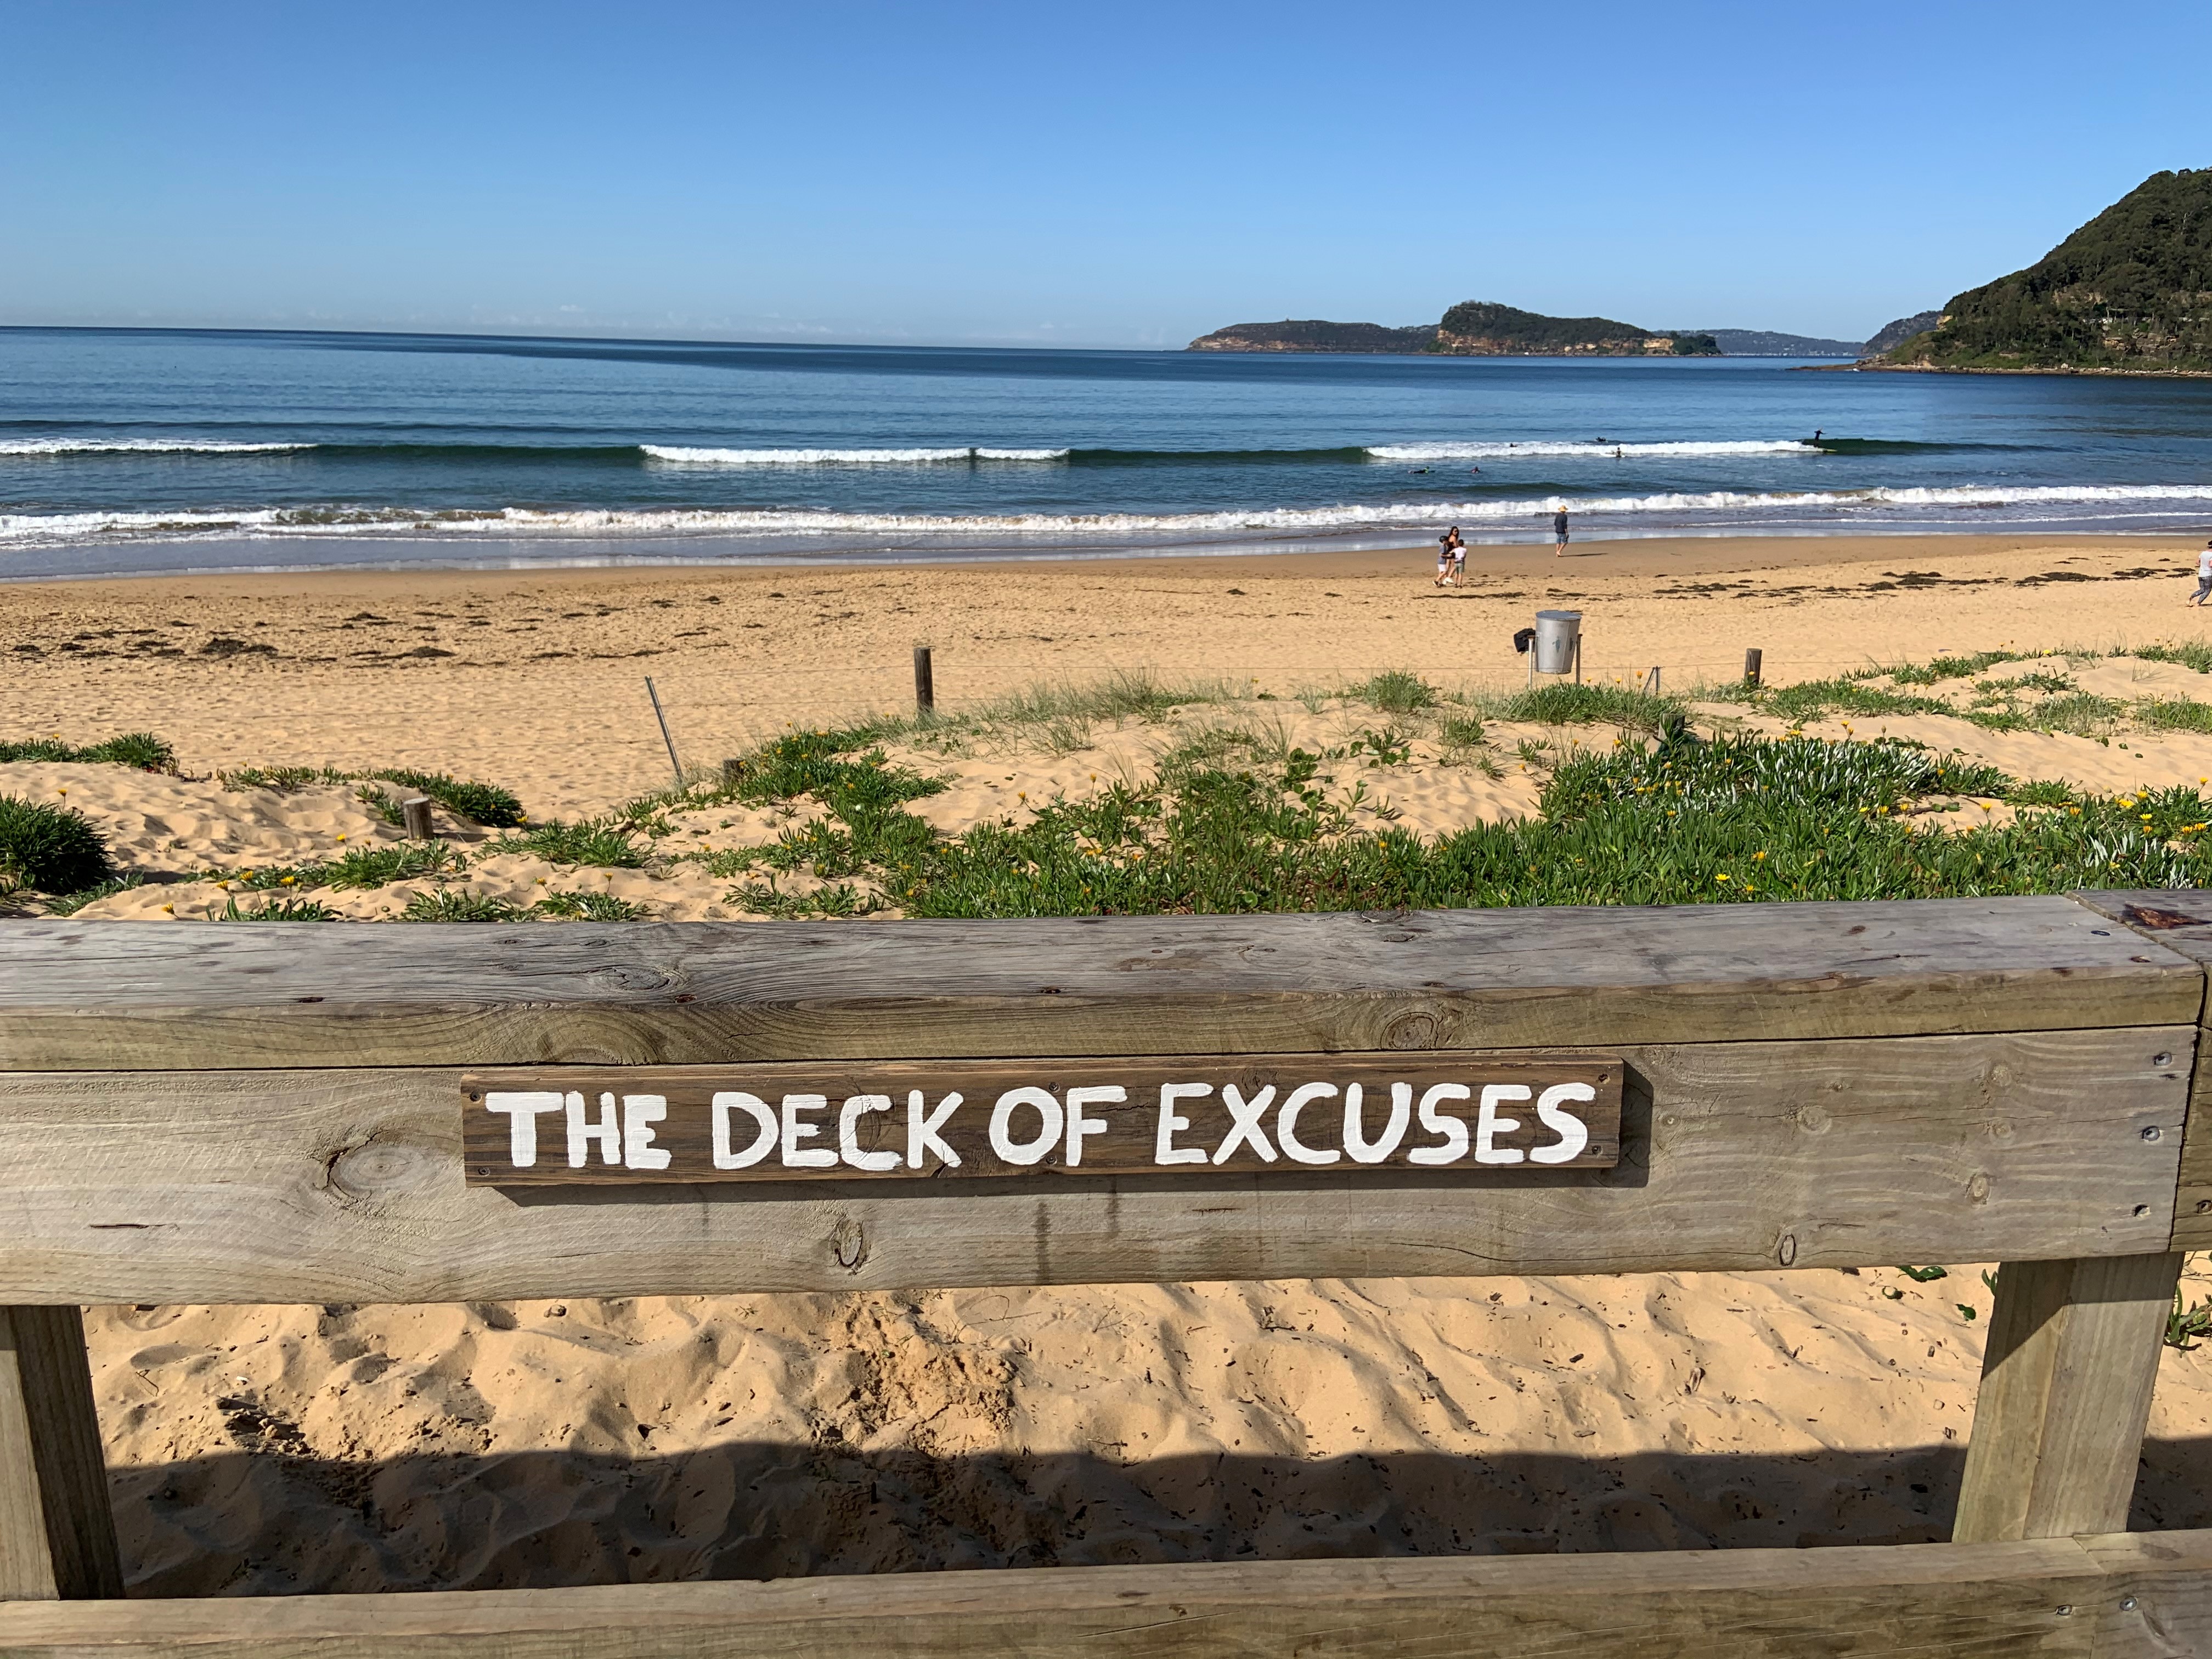 There are no seats here for you on the Deck of Excuses